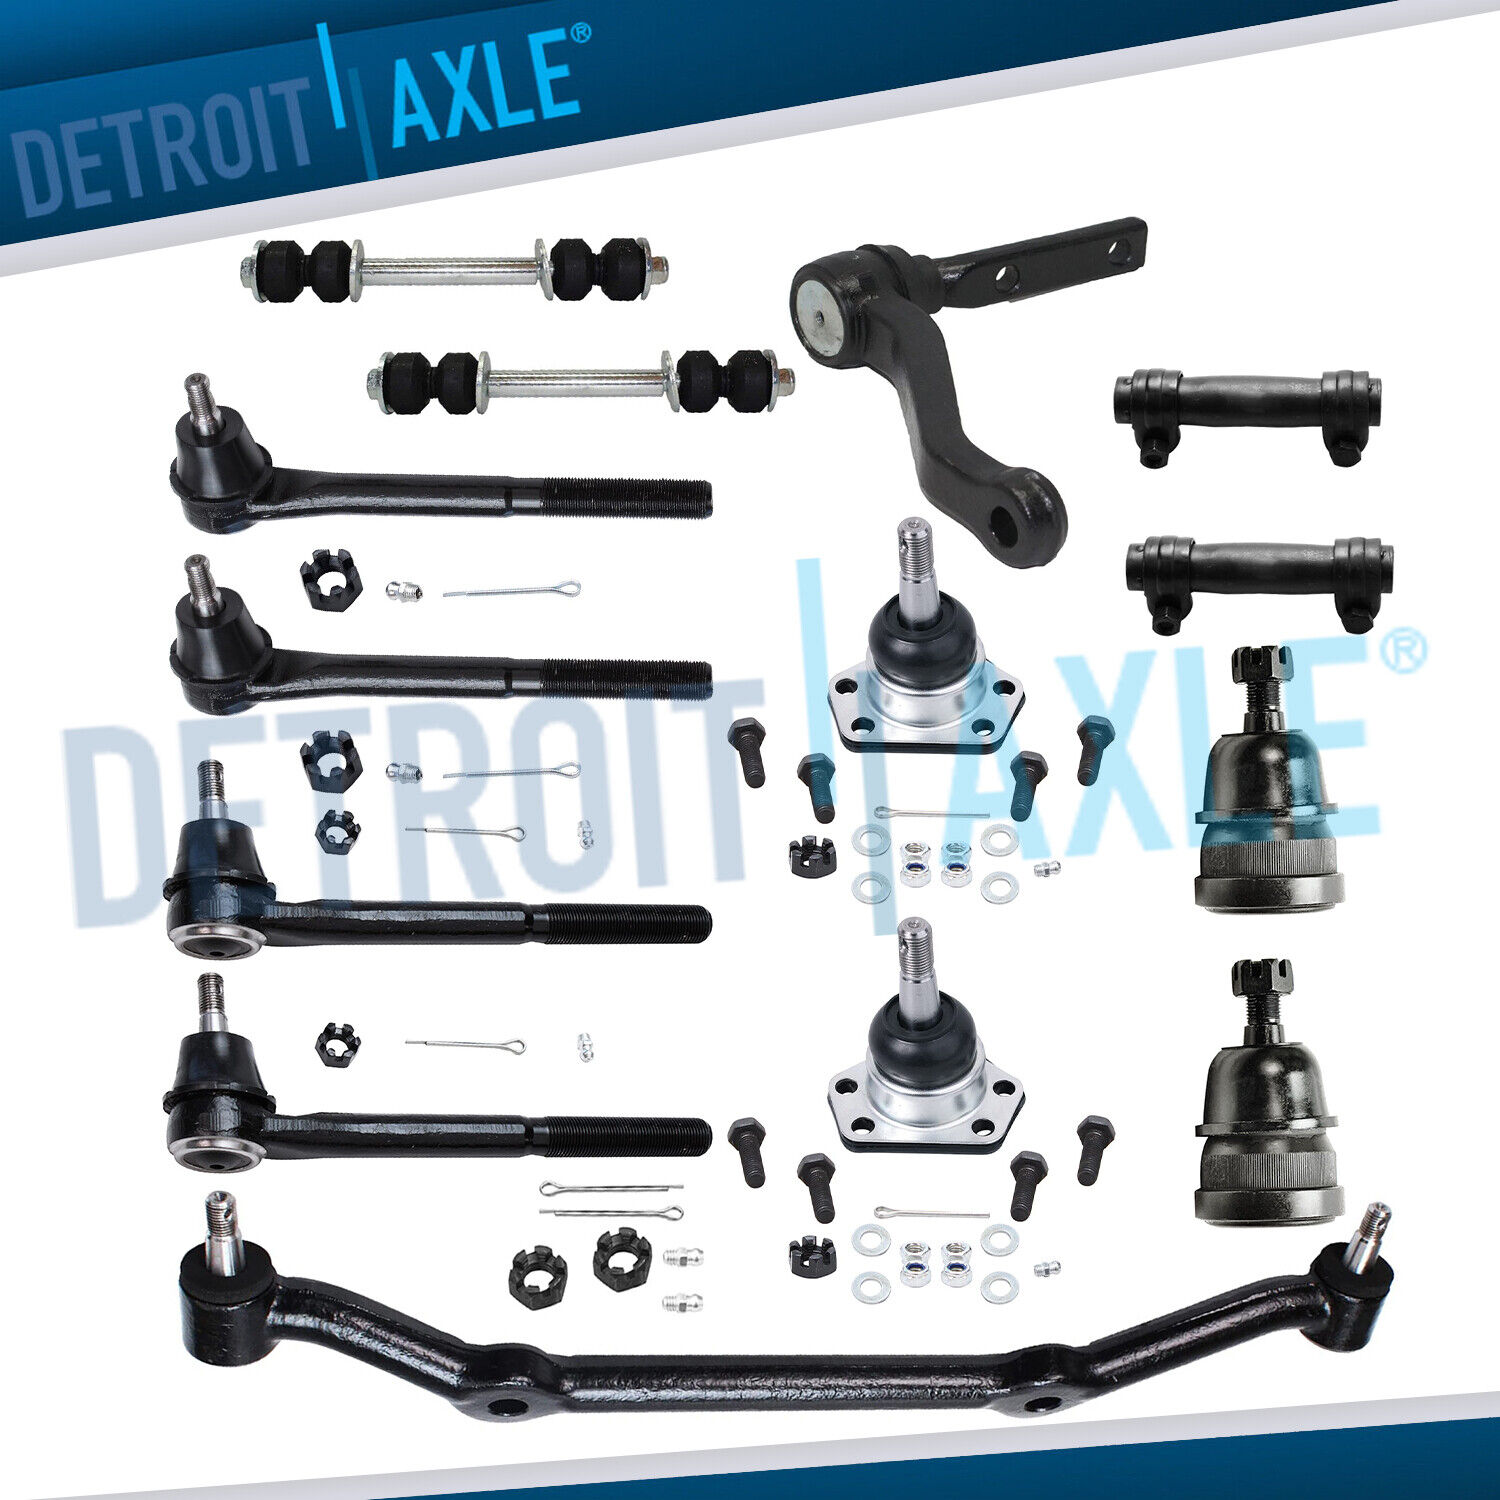 New 14pc Complete Front Suspension Kit for Chevy GMC Truck S10 Blazer - 2WD